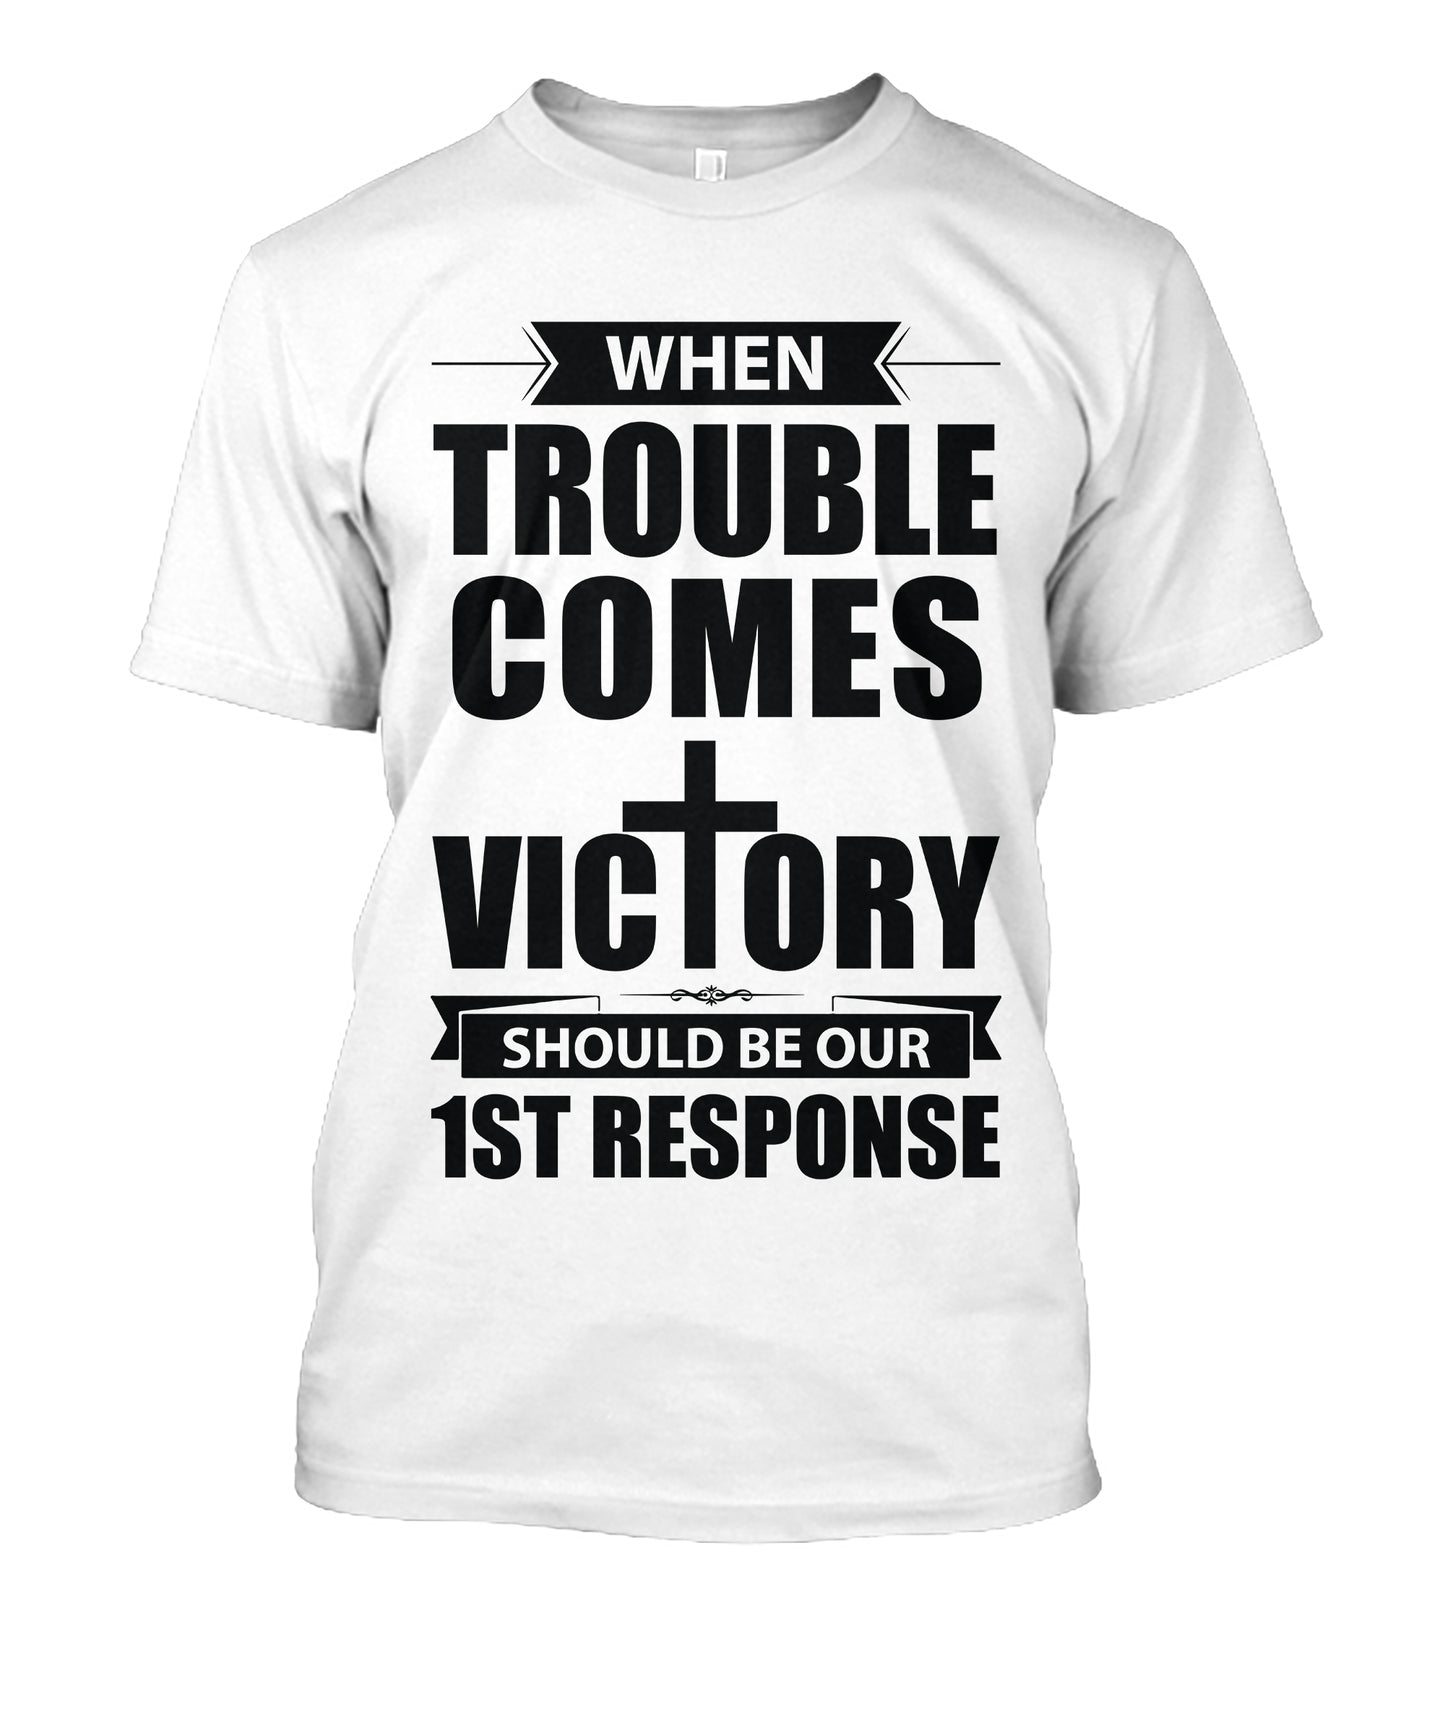 When Trouble Comes - Victory Should Be Our 1st Response